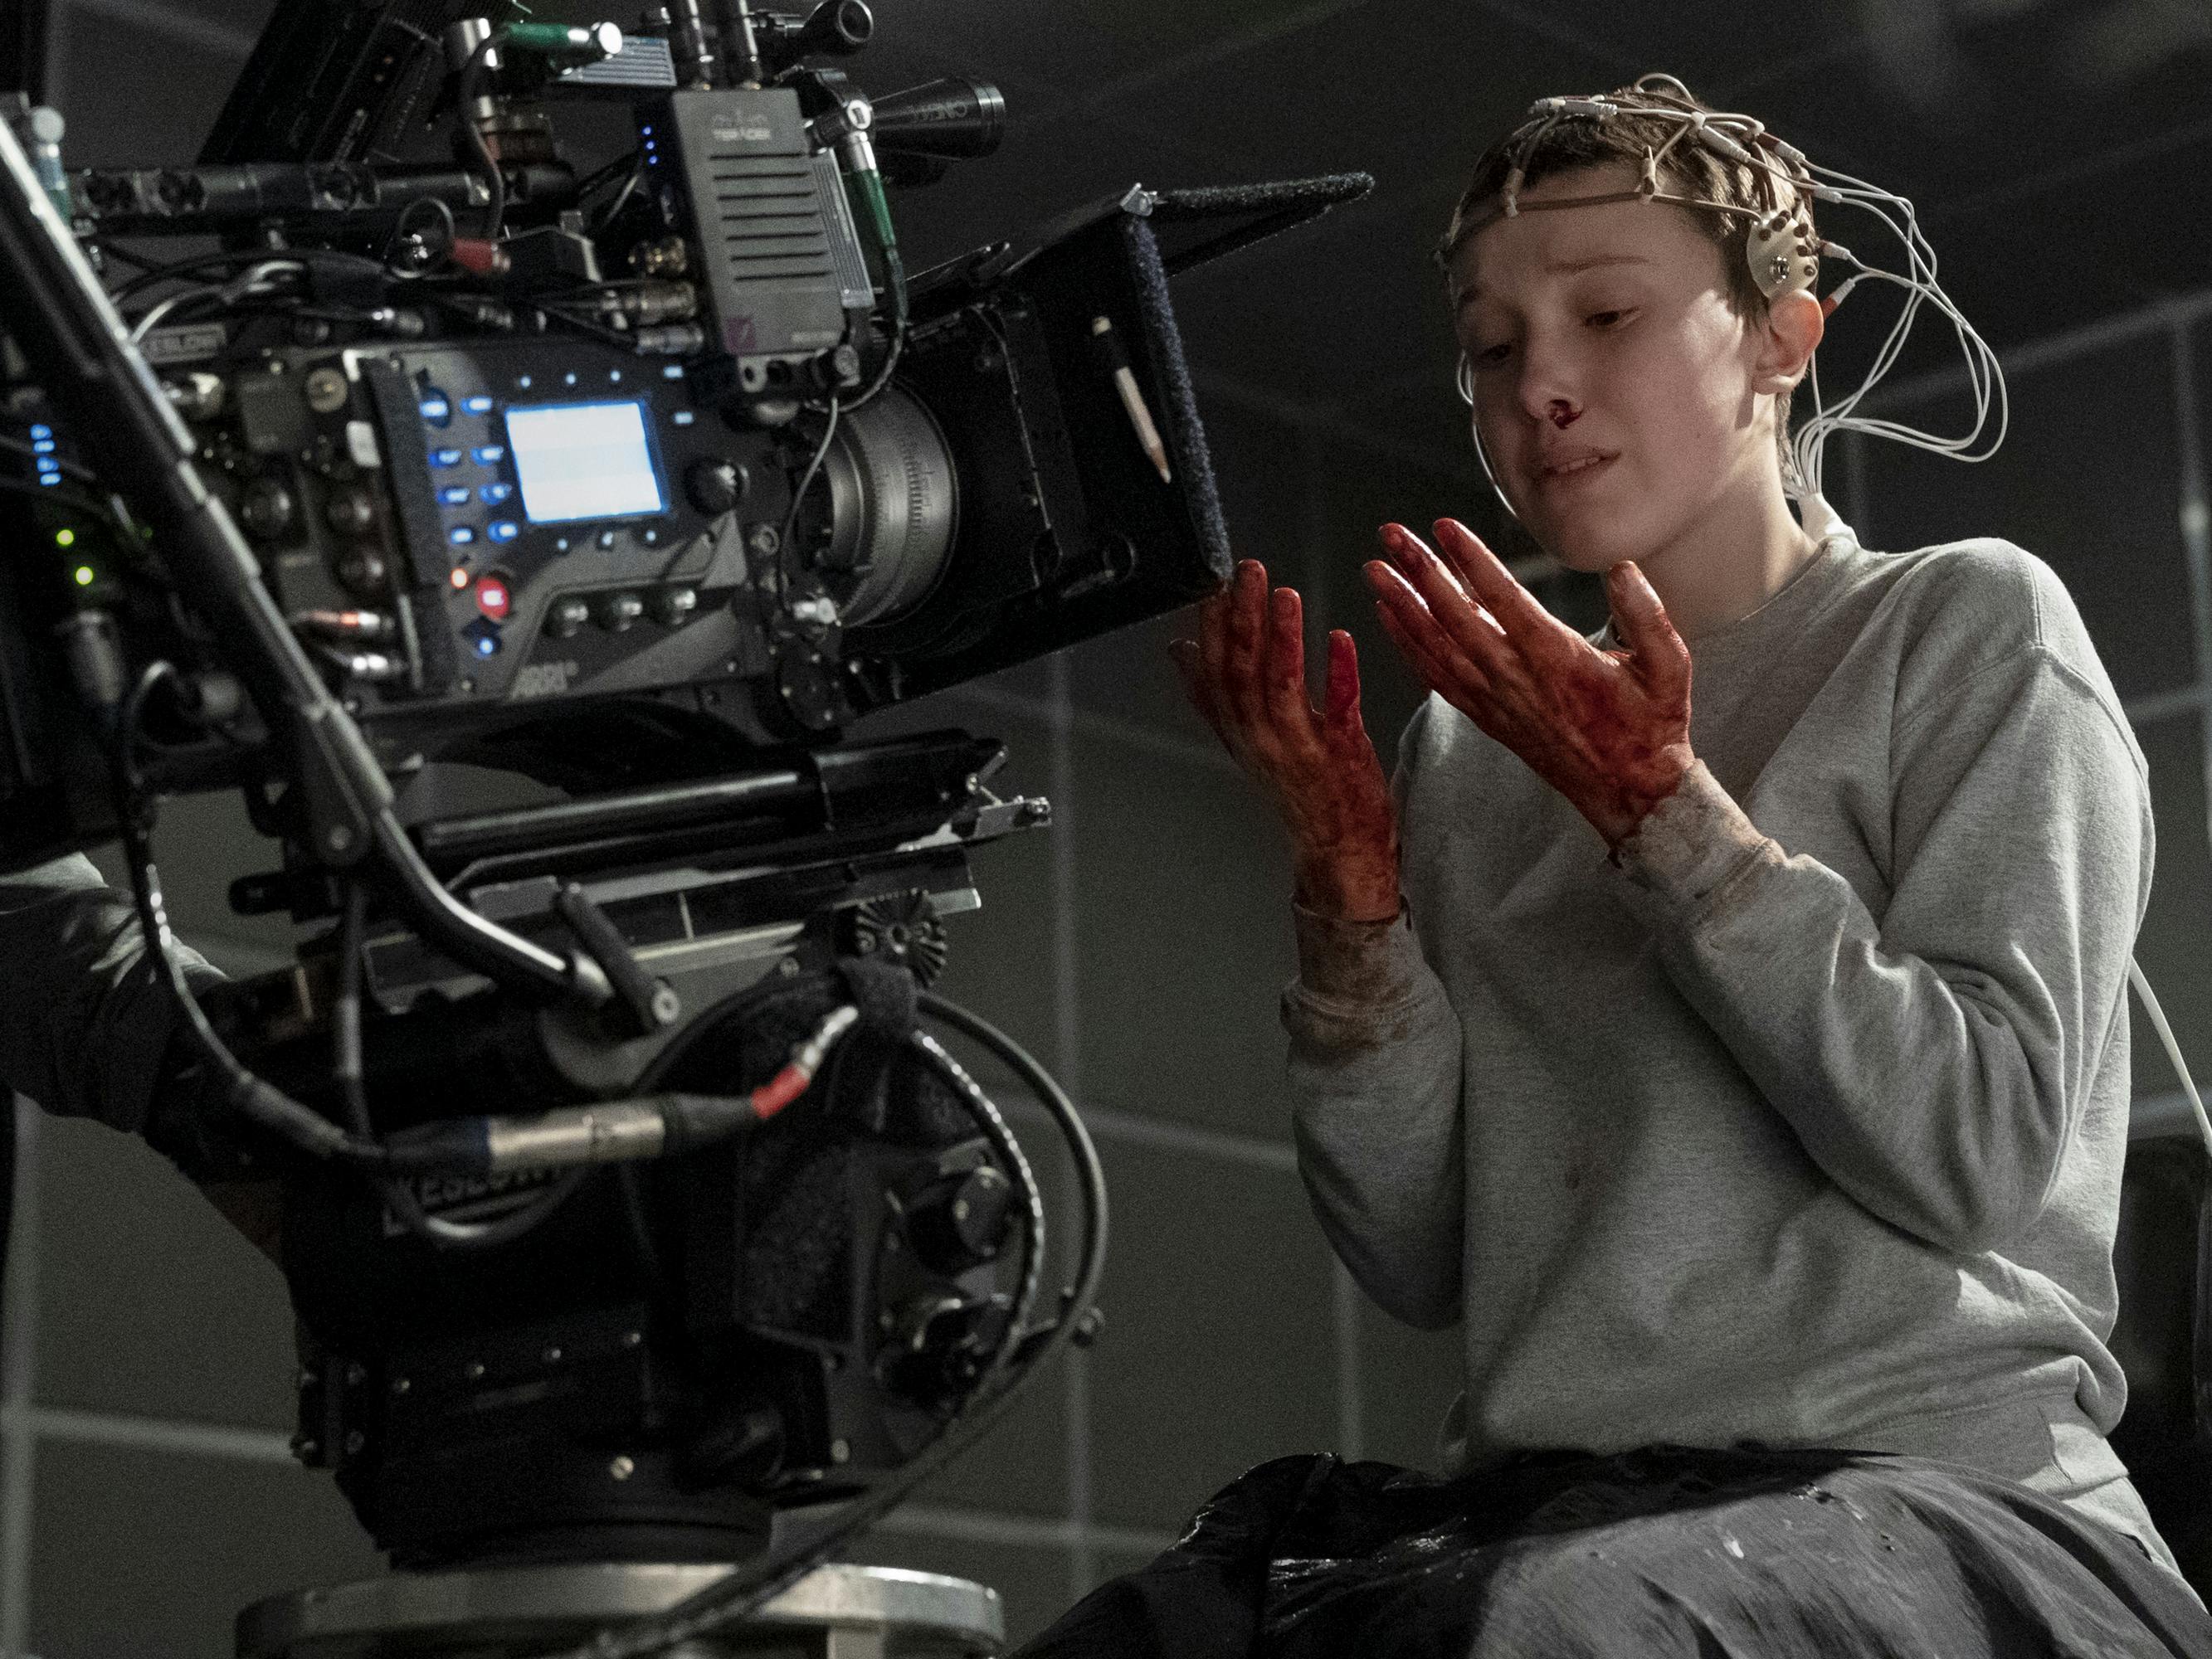 Eleven (Millie Bobby Brown) looks alarmingly at her bloody hands, while a camera rig looms near.